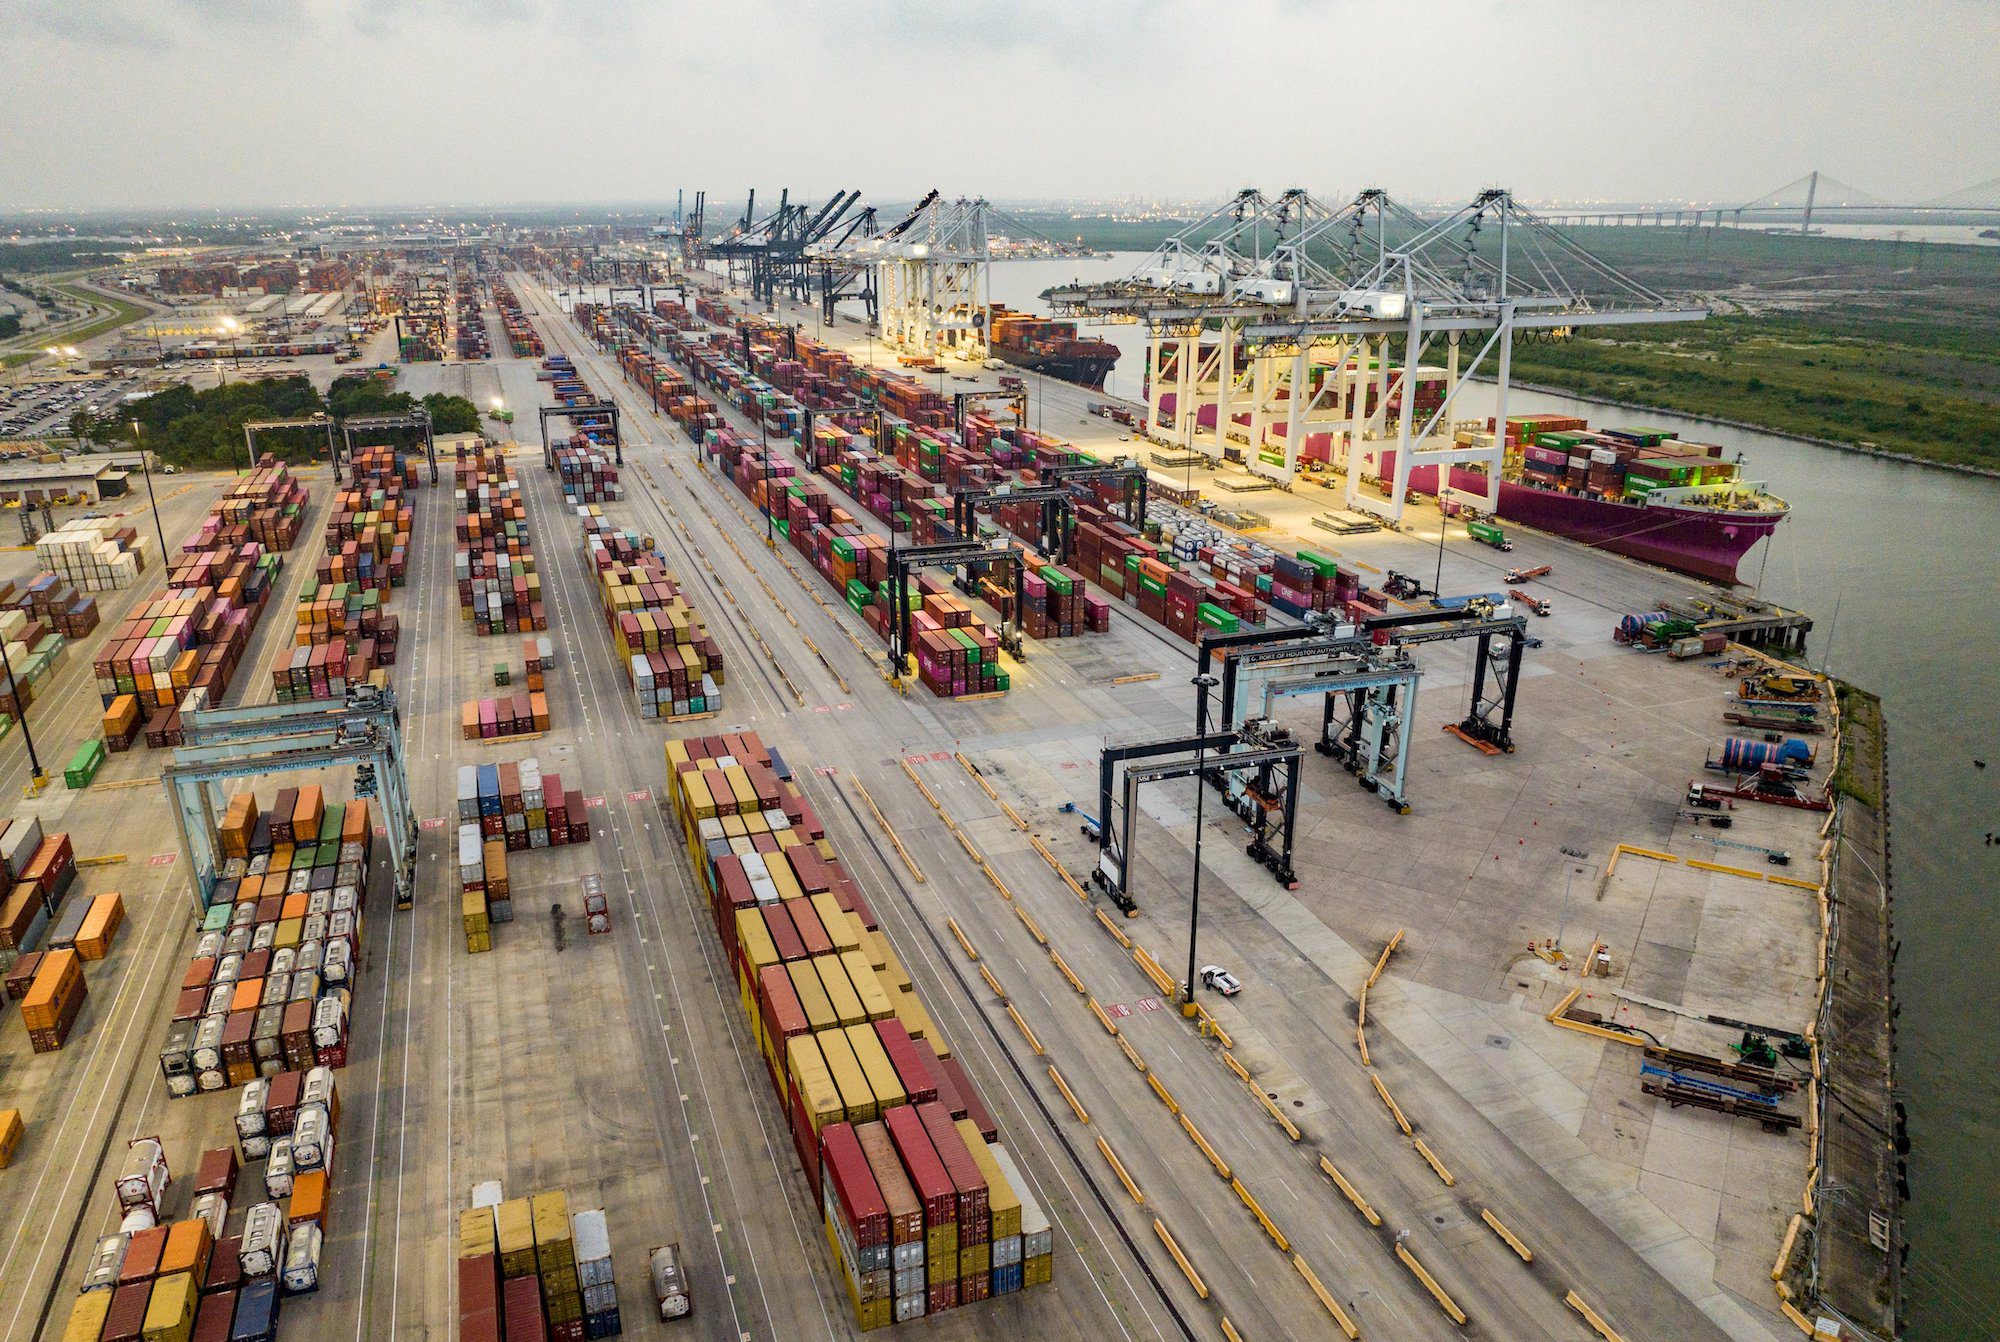 An aerial view of a container terminal at Port Houston